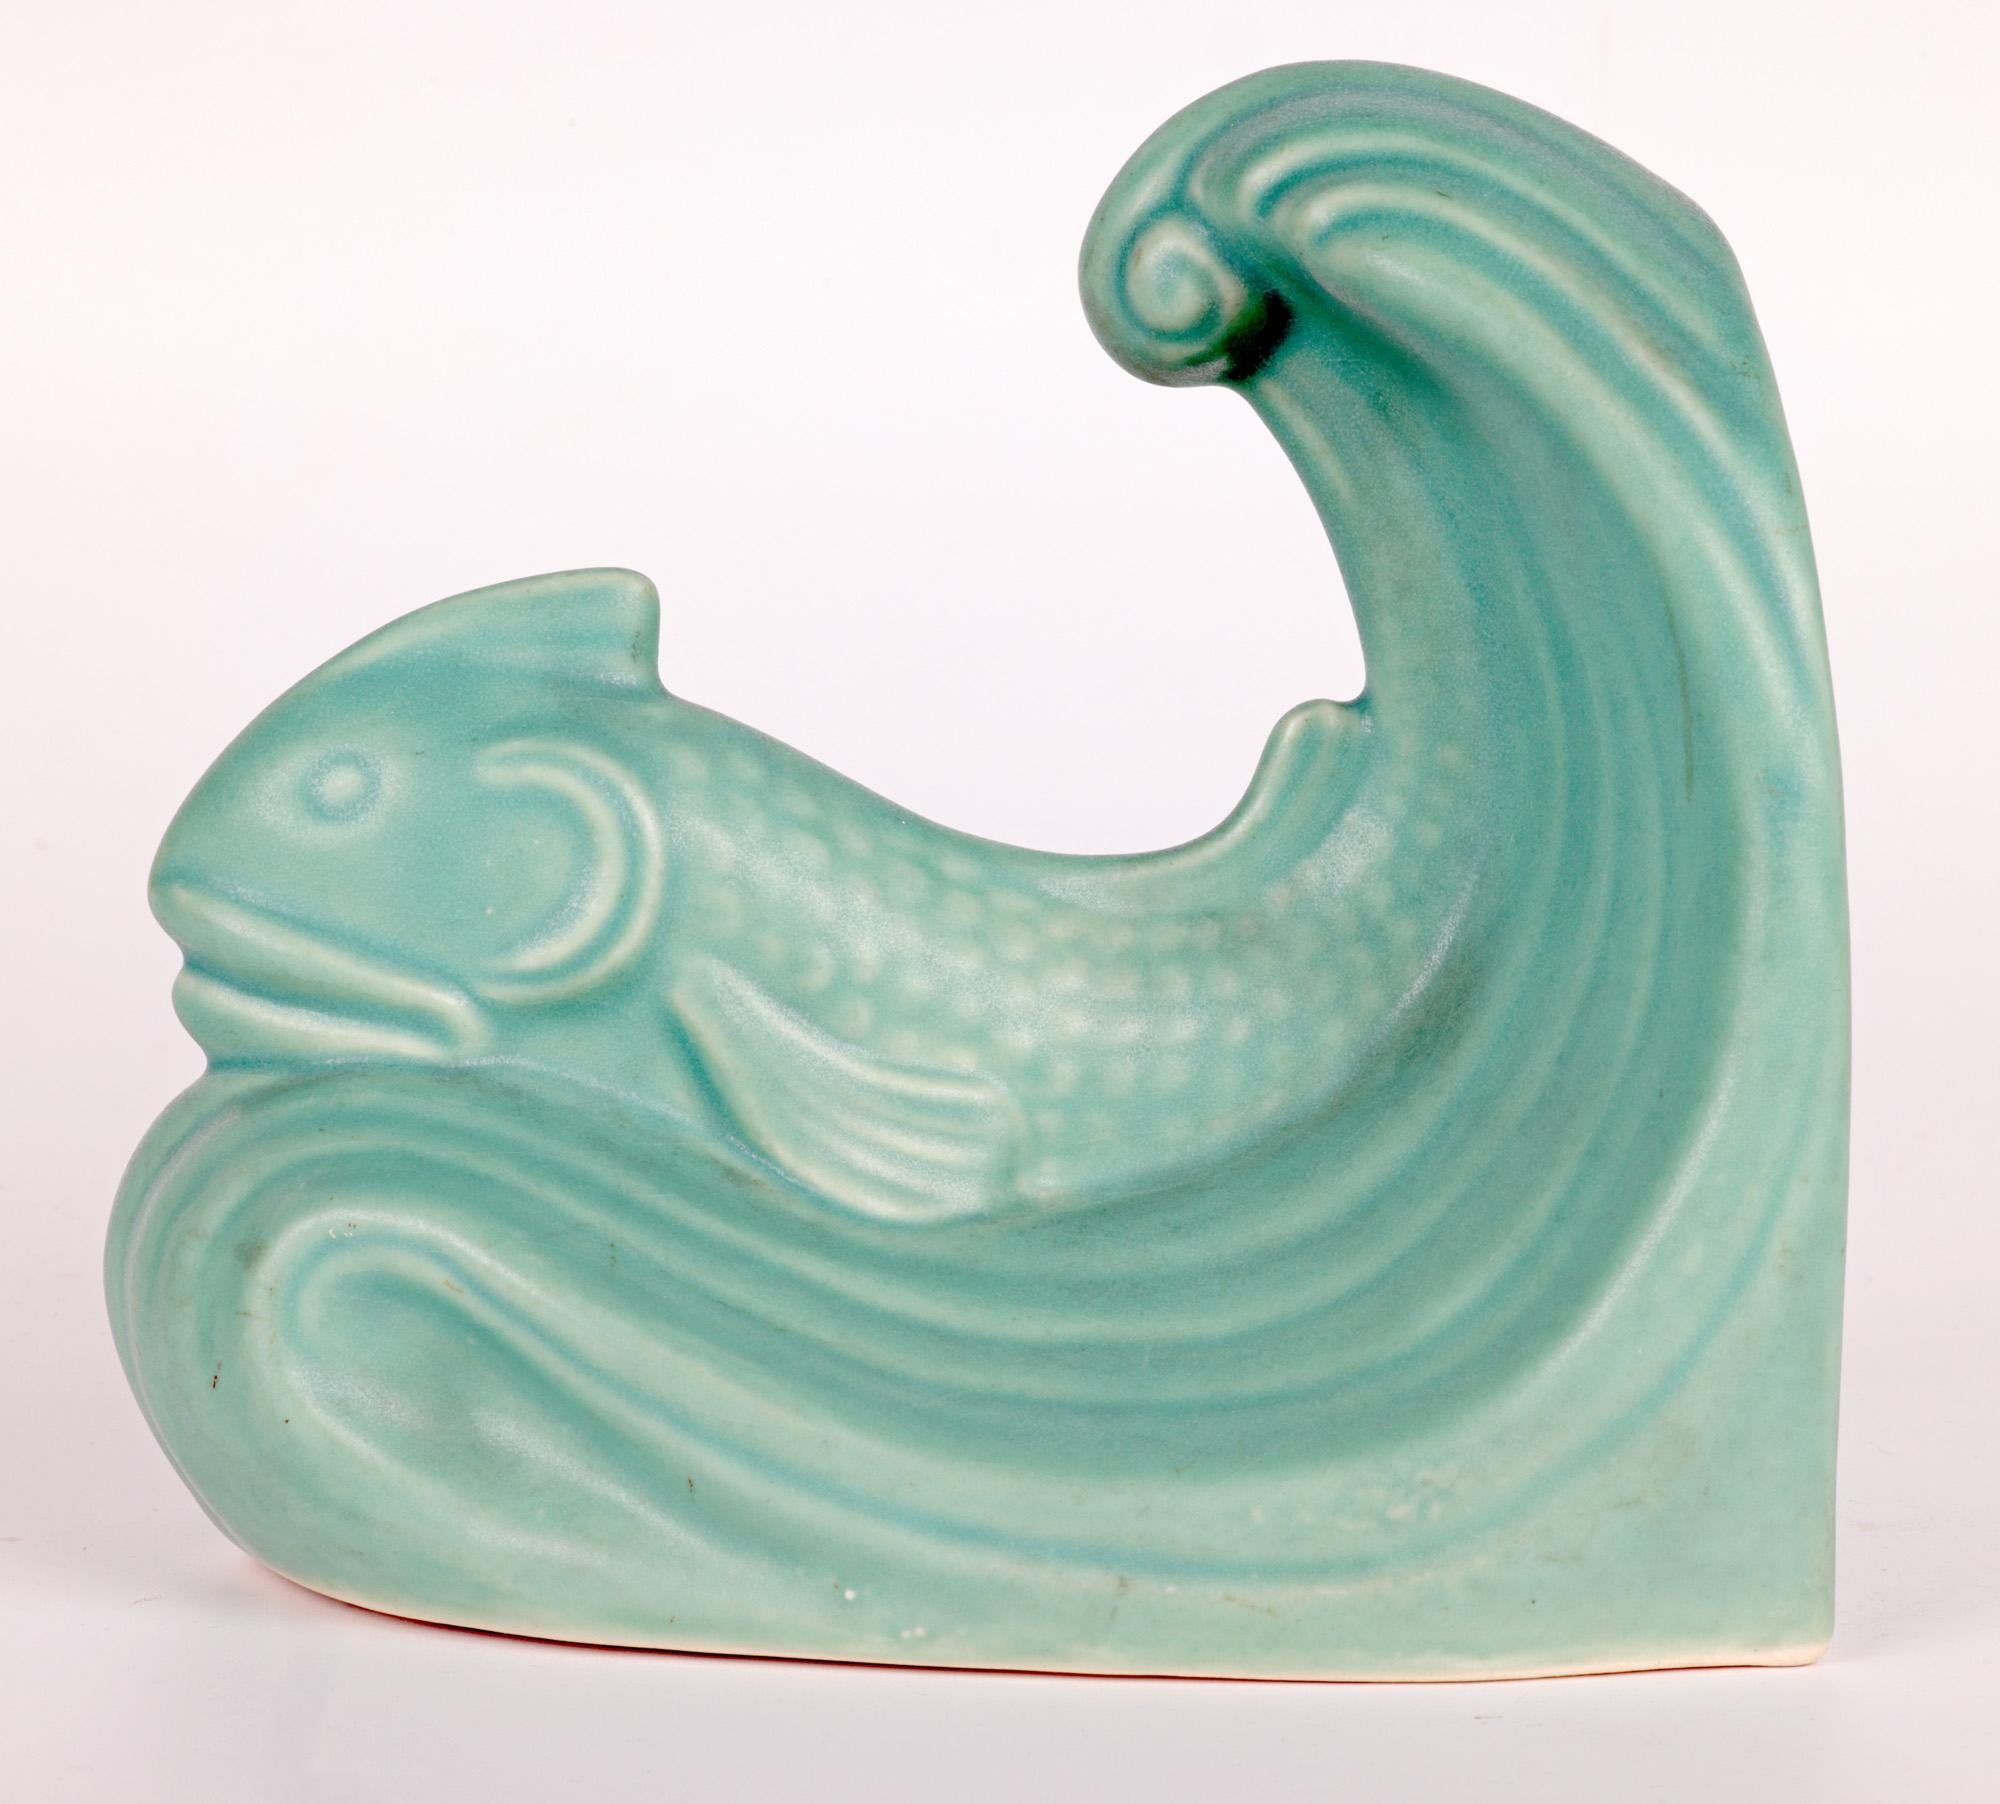 A scarce and wonderful pair Art Deco bookends formed as fish and waves by the Derbyshire based pottery Langley Lovatts and dating from around 1935. Made in the early years of the Oakes period the novelty stoneware bookends are formed as a solitary